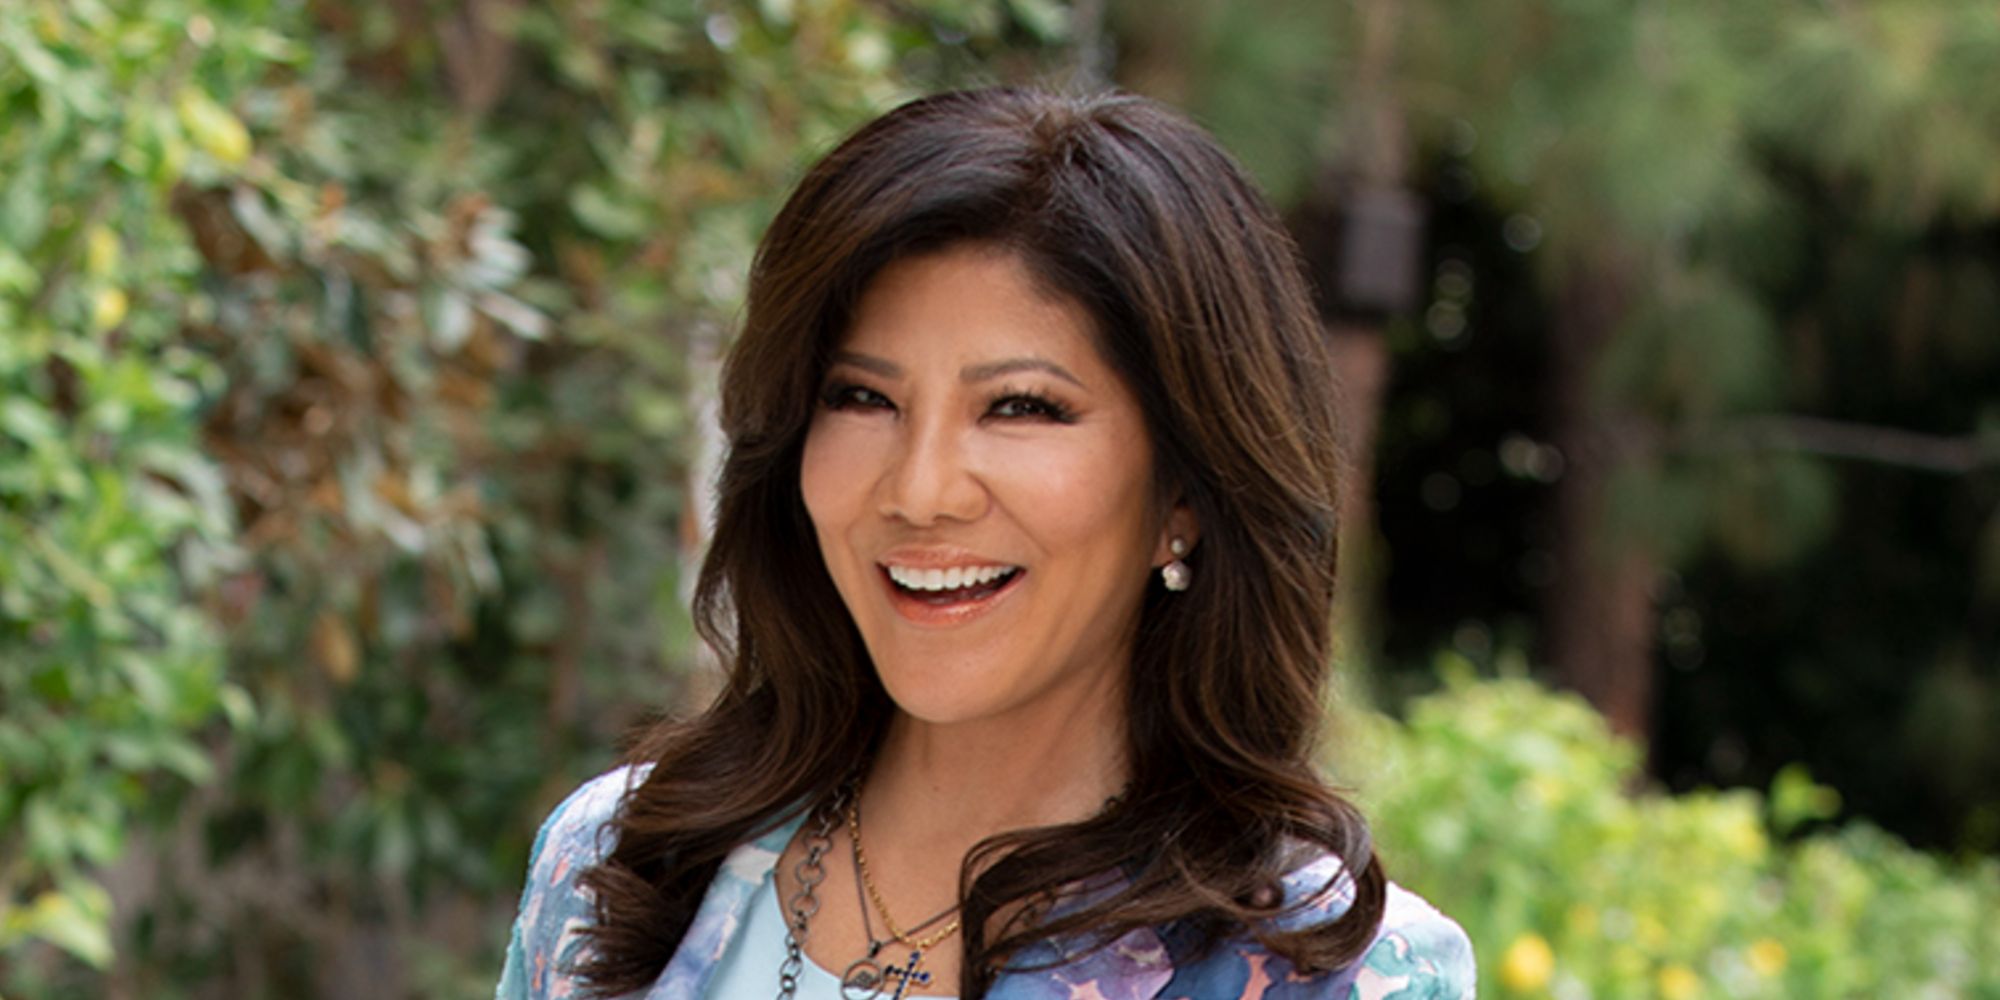 Julie Chen Moonves on Big Brother 23